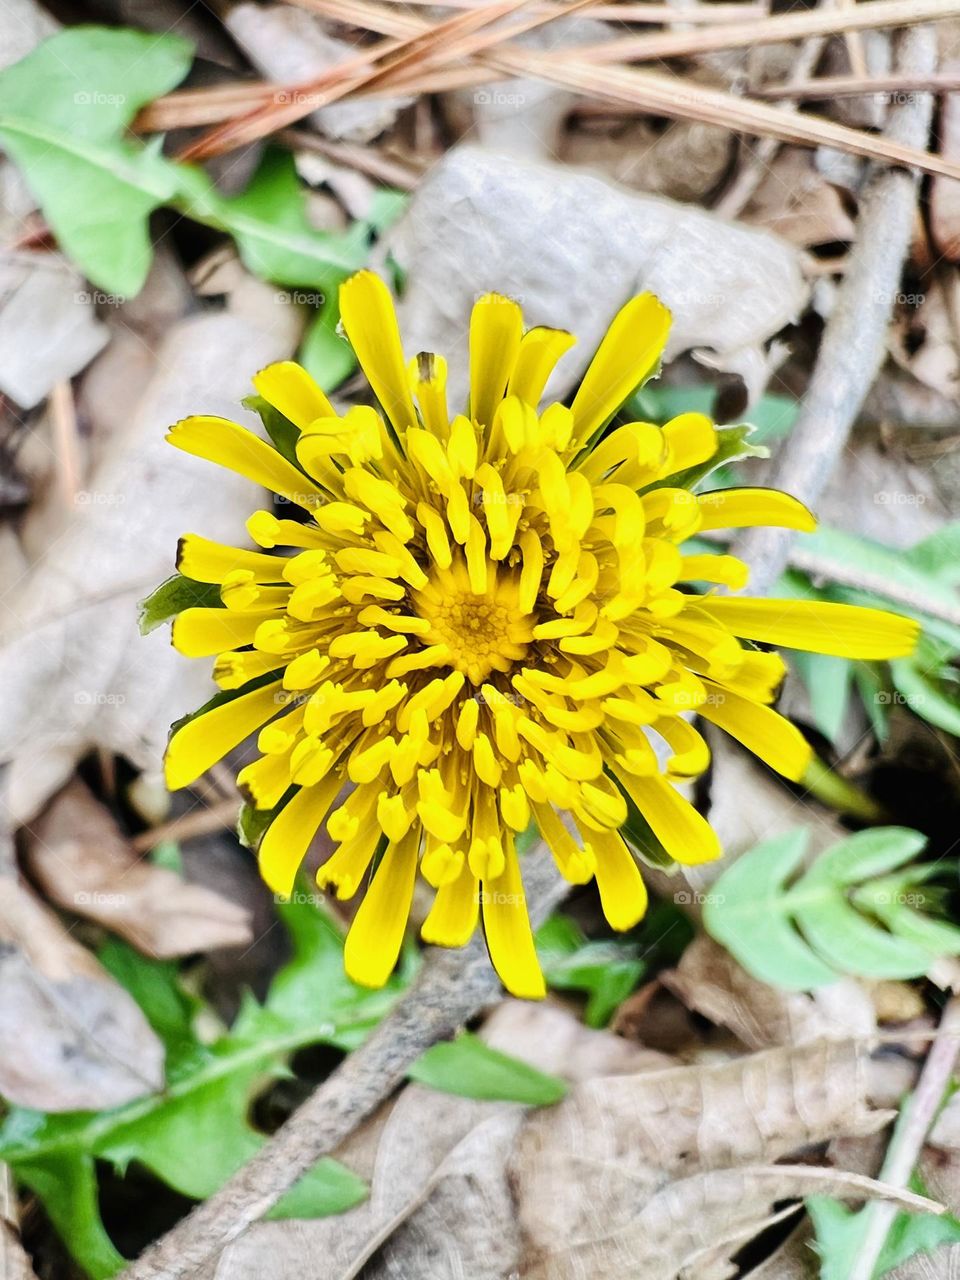 Overhead closeup of yellow dandelion just opening. A definite sign of spring on the way.